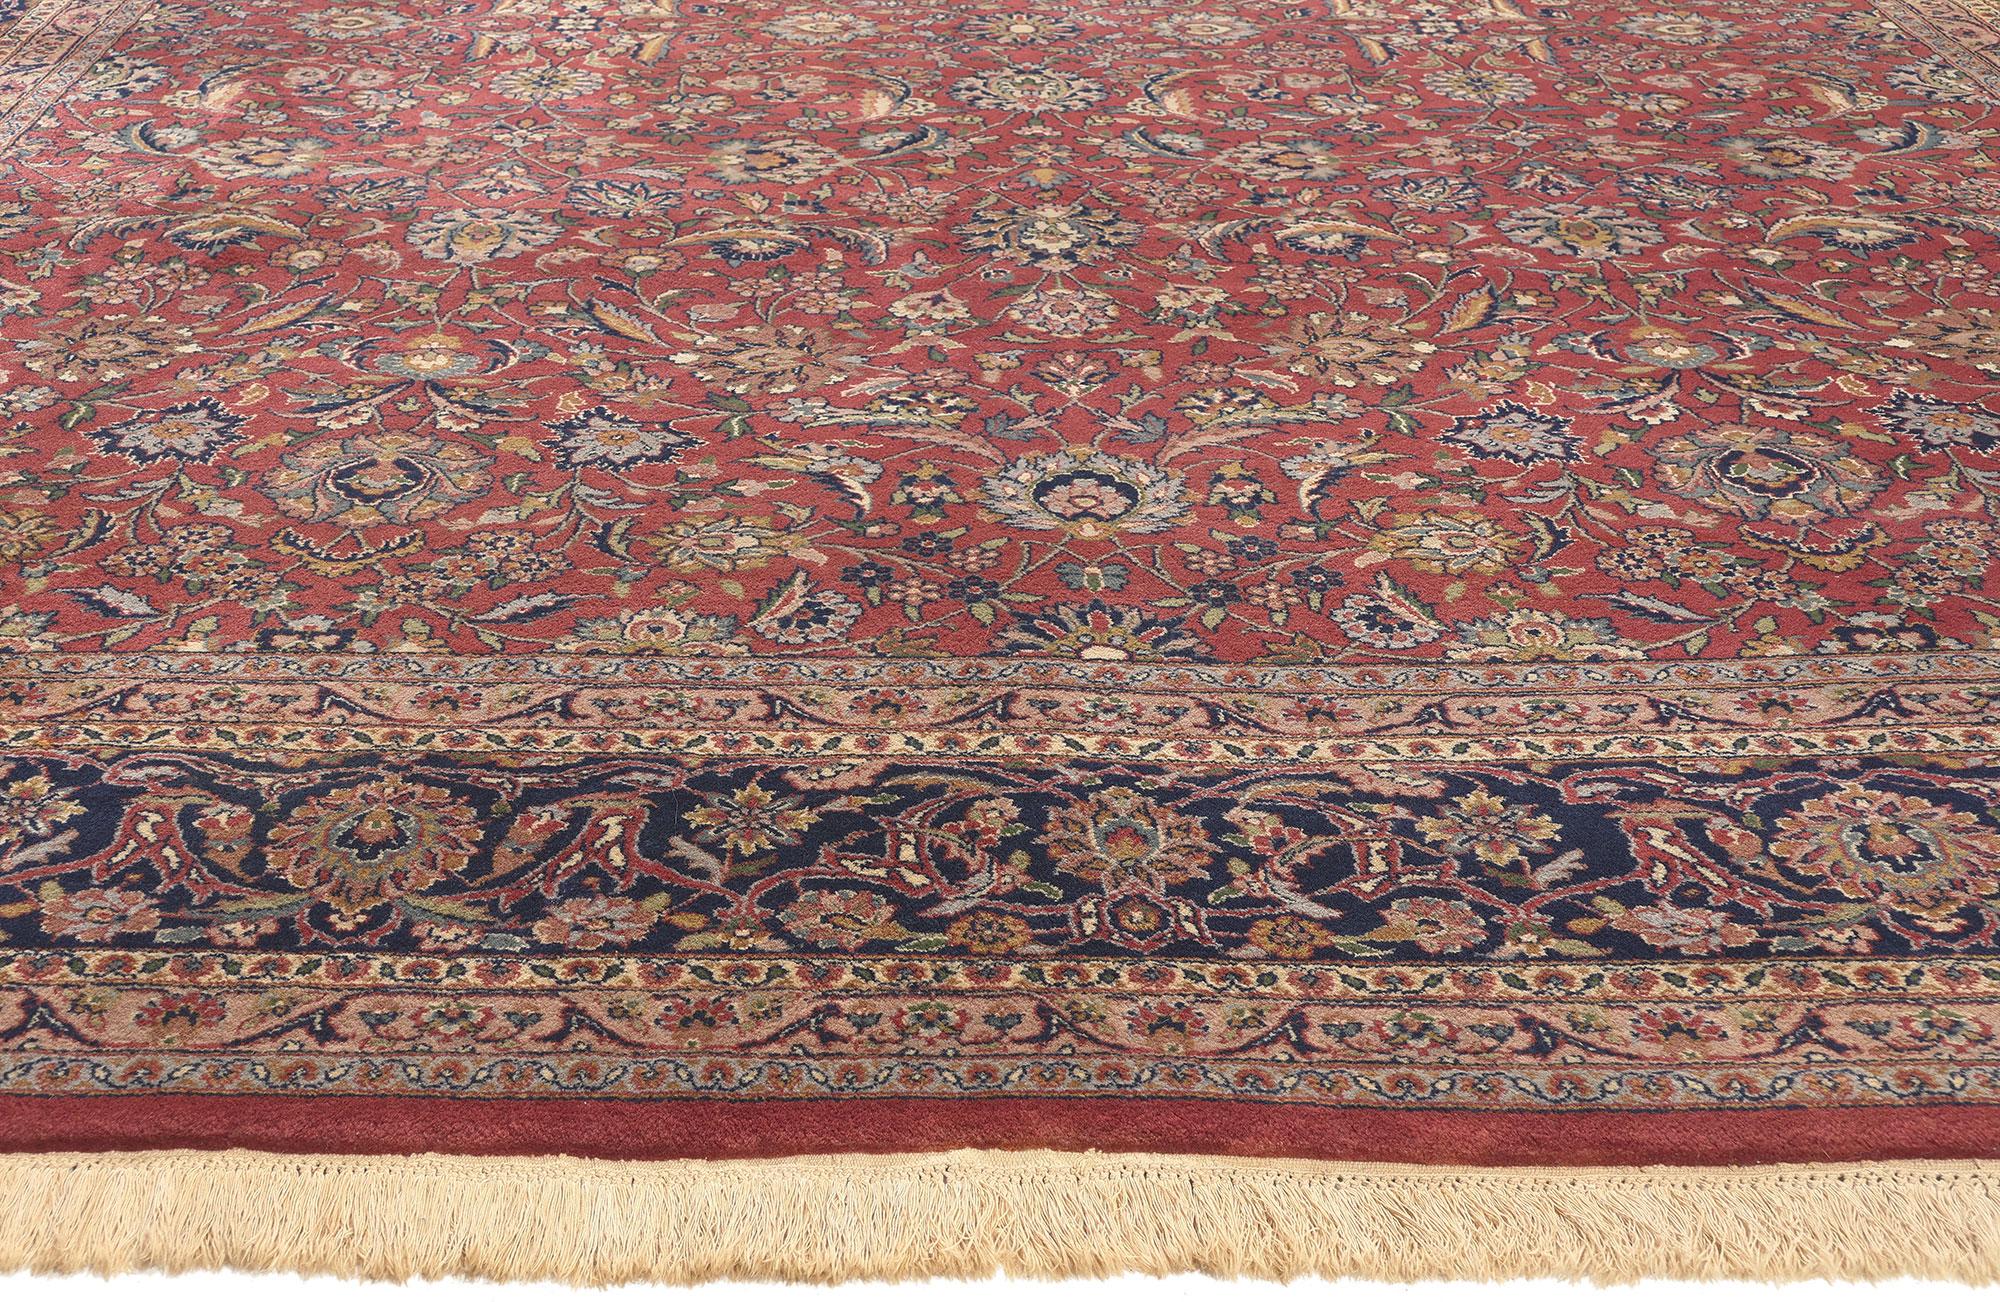 Vintage Indian Tabriz Rug, Timeless Elegance Meets Traditional Sensibility In Good Condition For Sale In Dallas, TX